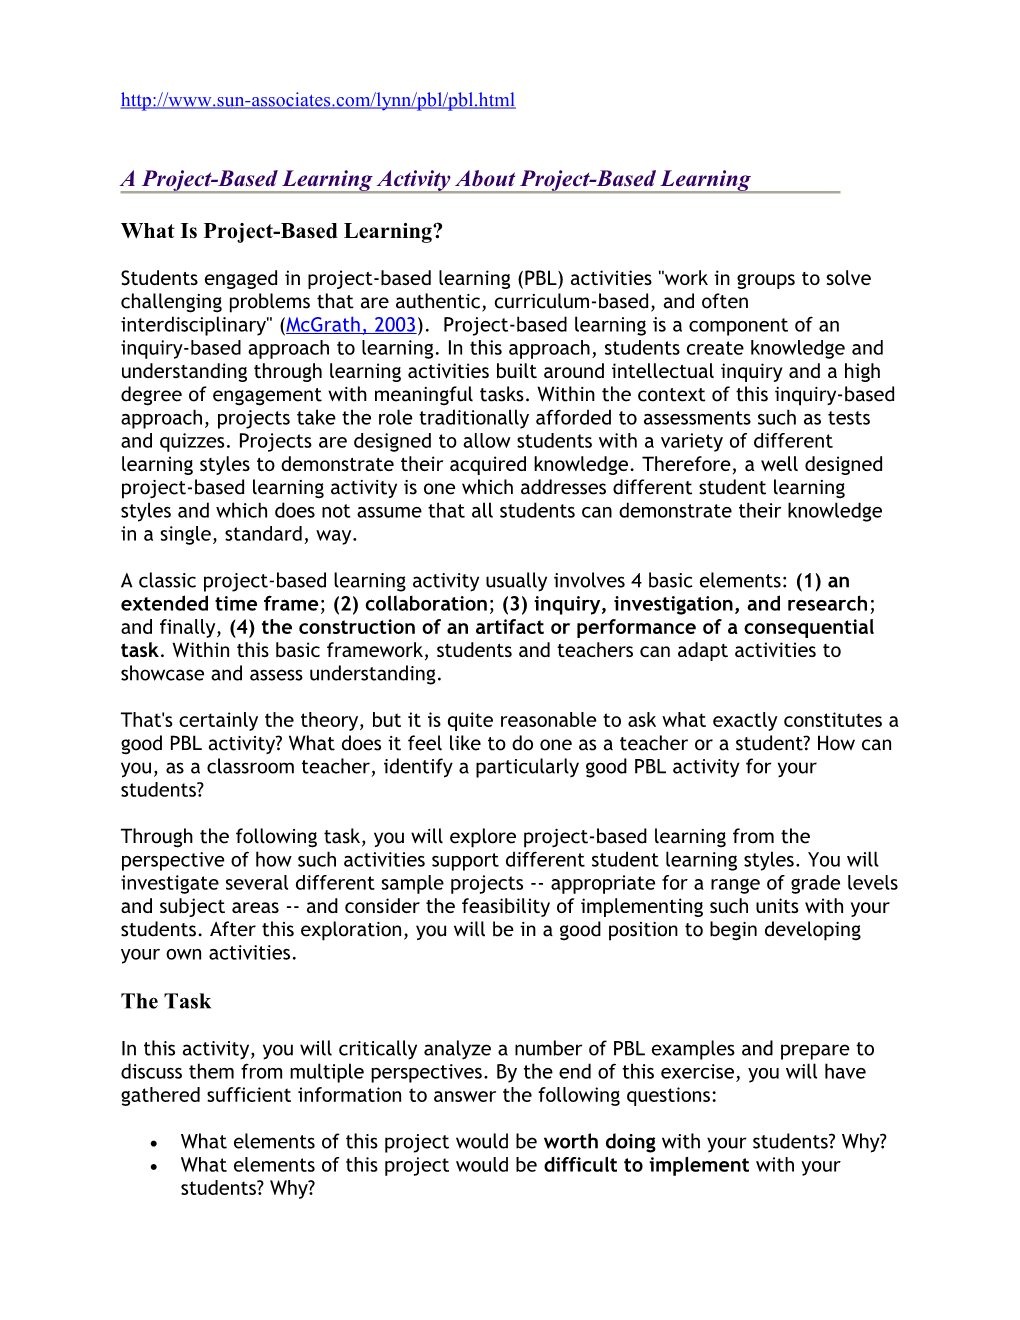 A Project-Based Learning Activity About Project-Based Learning